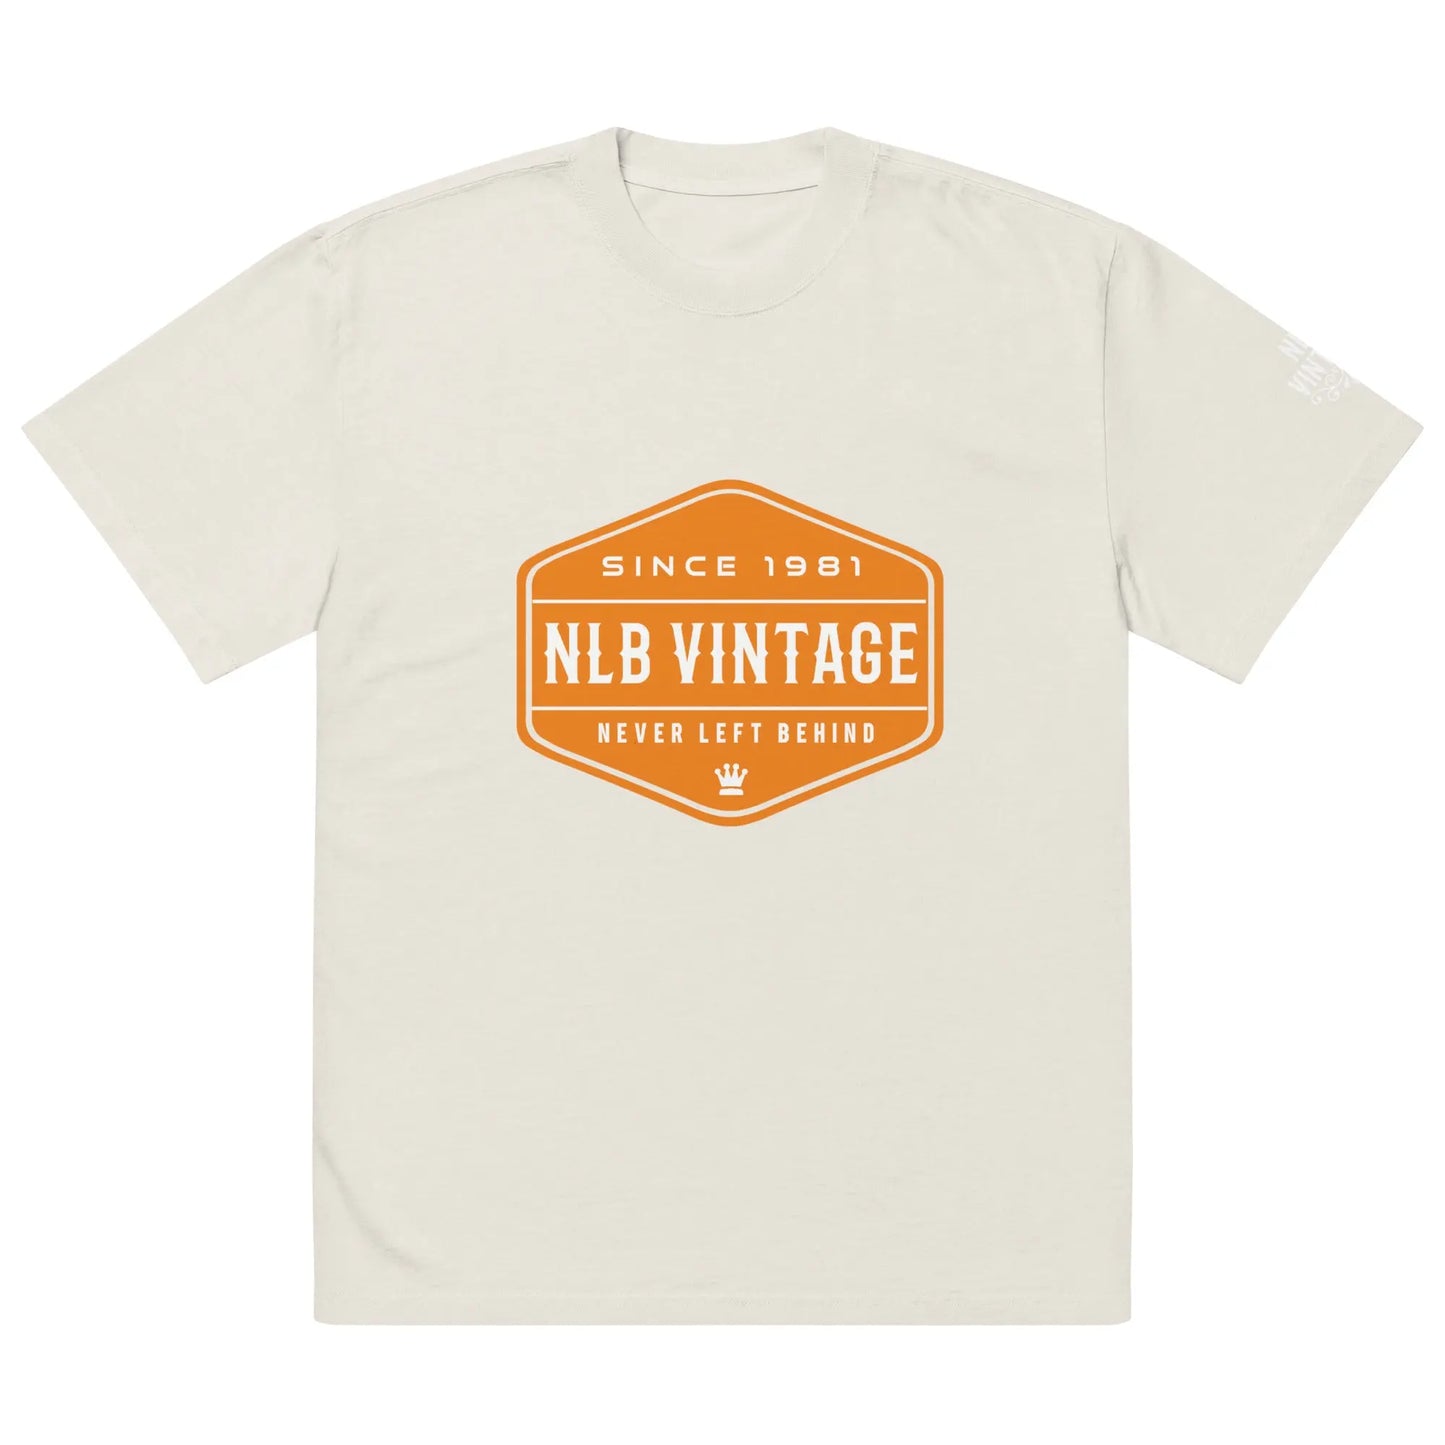 "NEVER LEFT BEHIND" Oversized faded t-shirt by NLB VINTAGE NLB VINTAGE